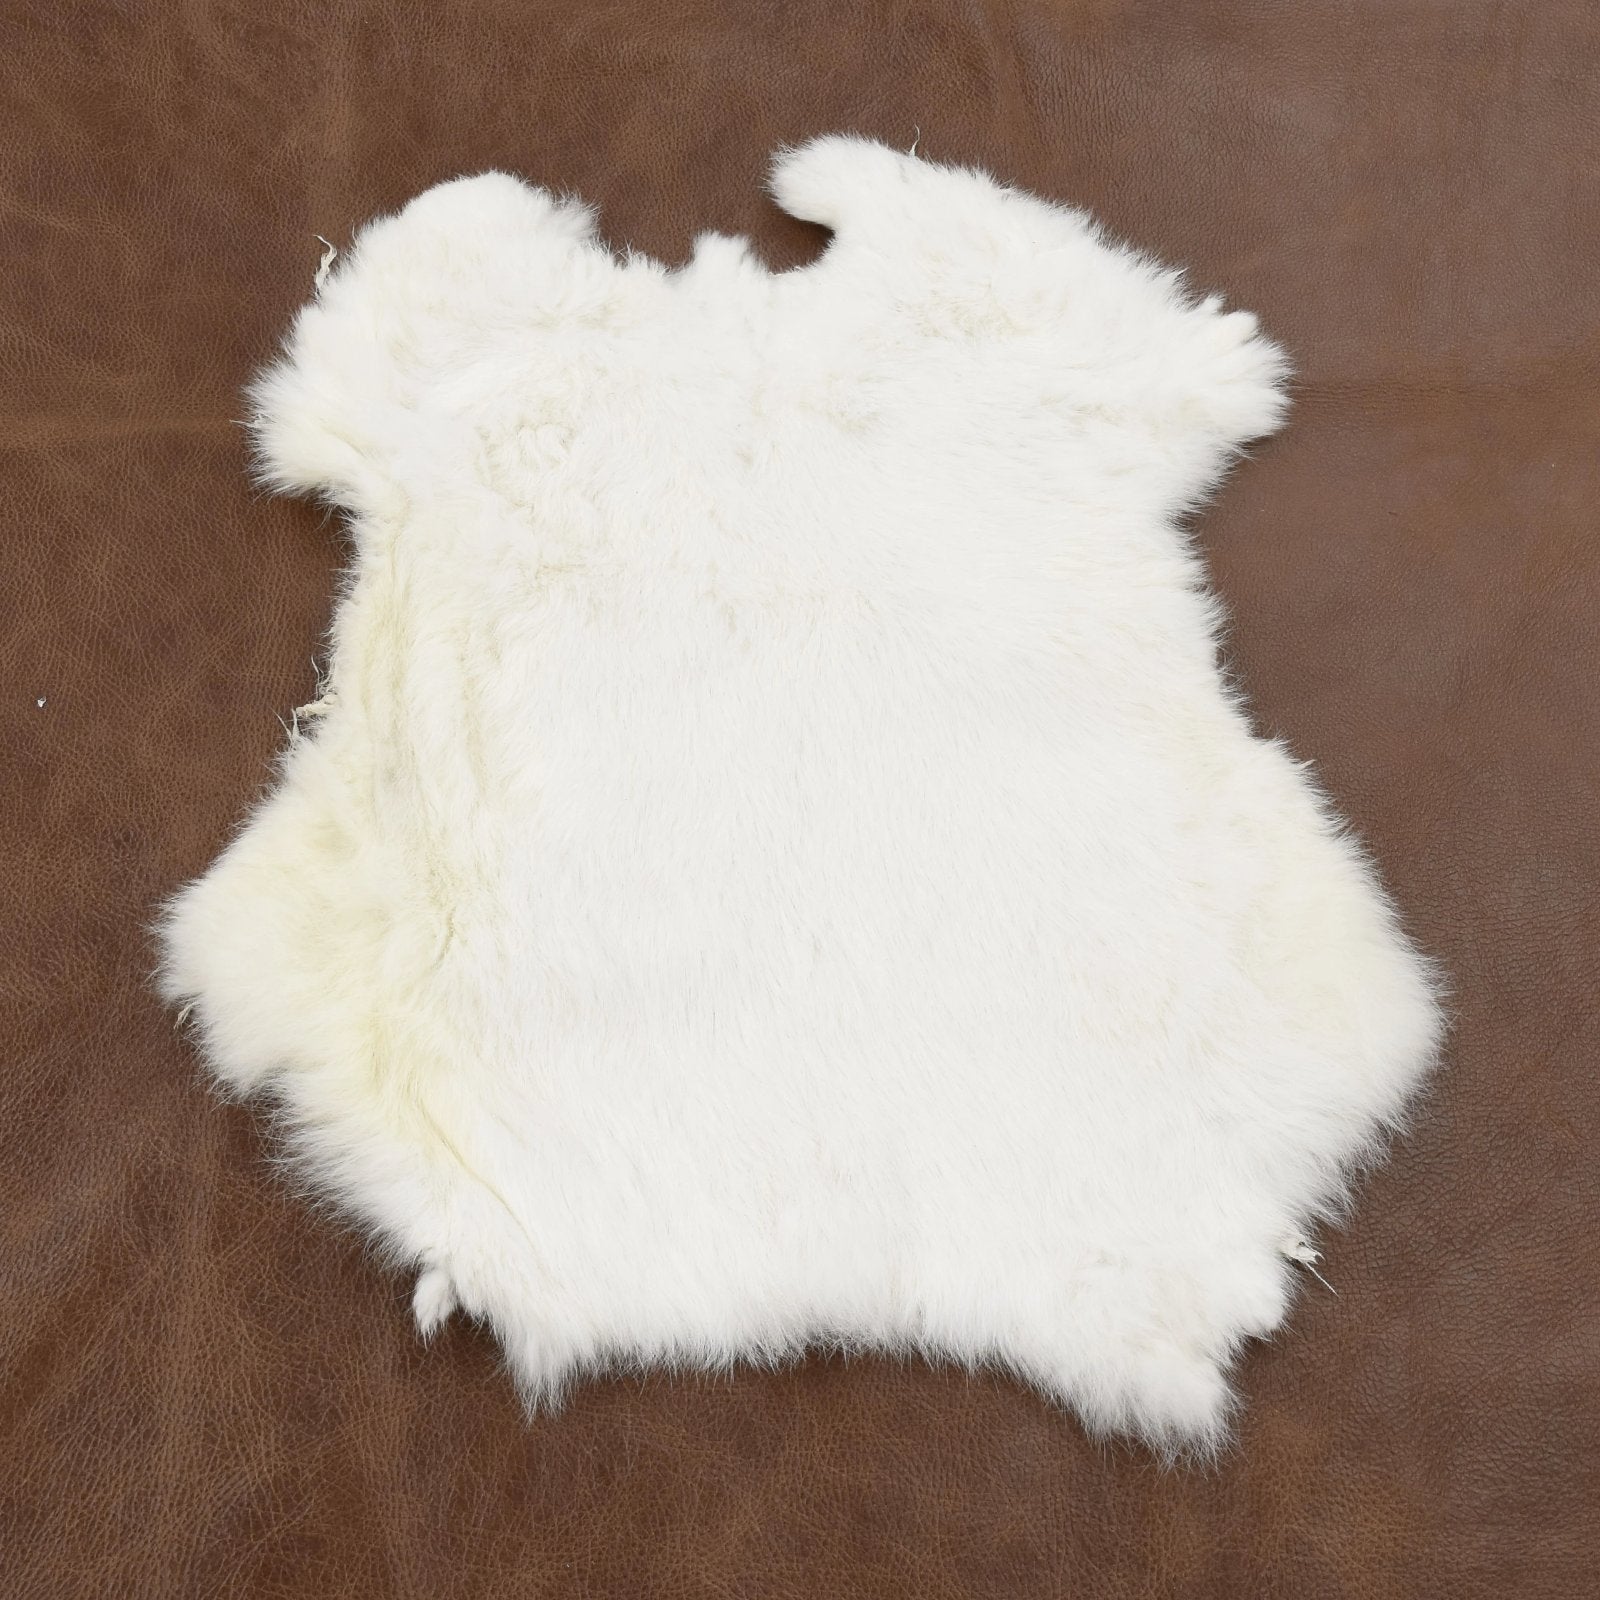 Rabbit Fur Pelts - Mixed Packs & Singles | The Leather Guy